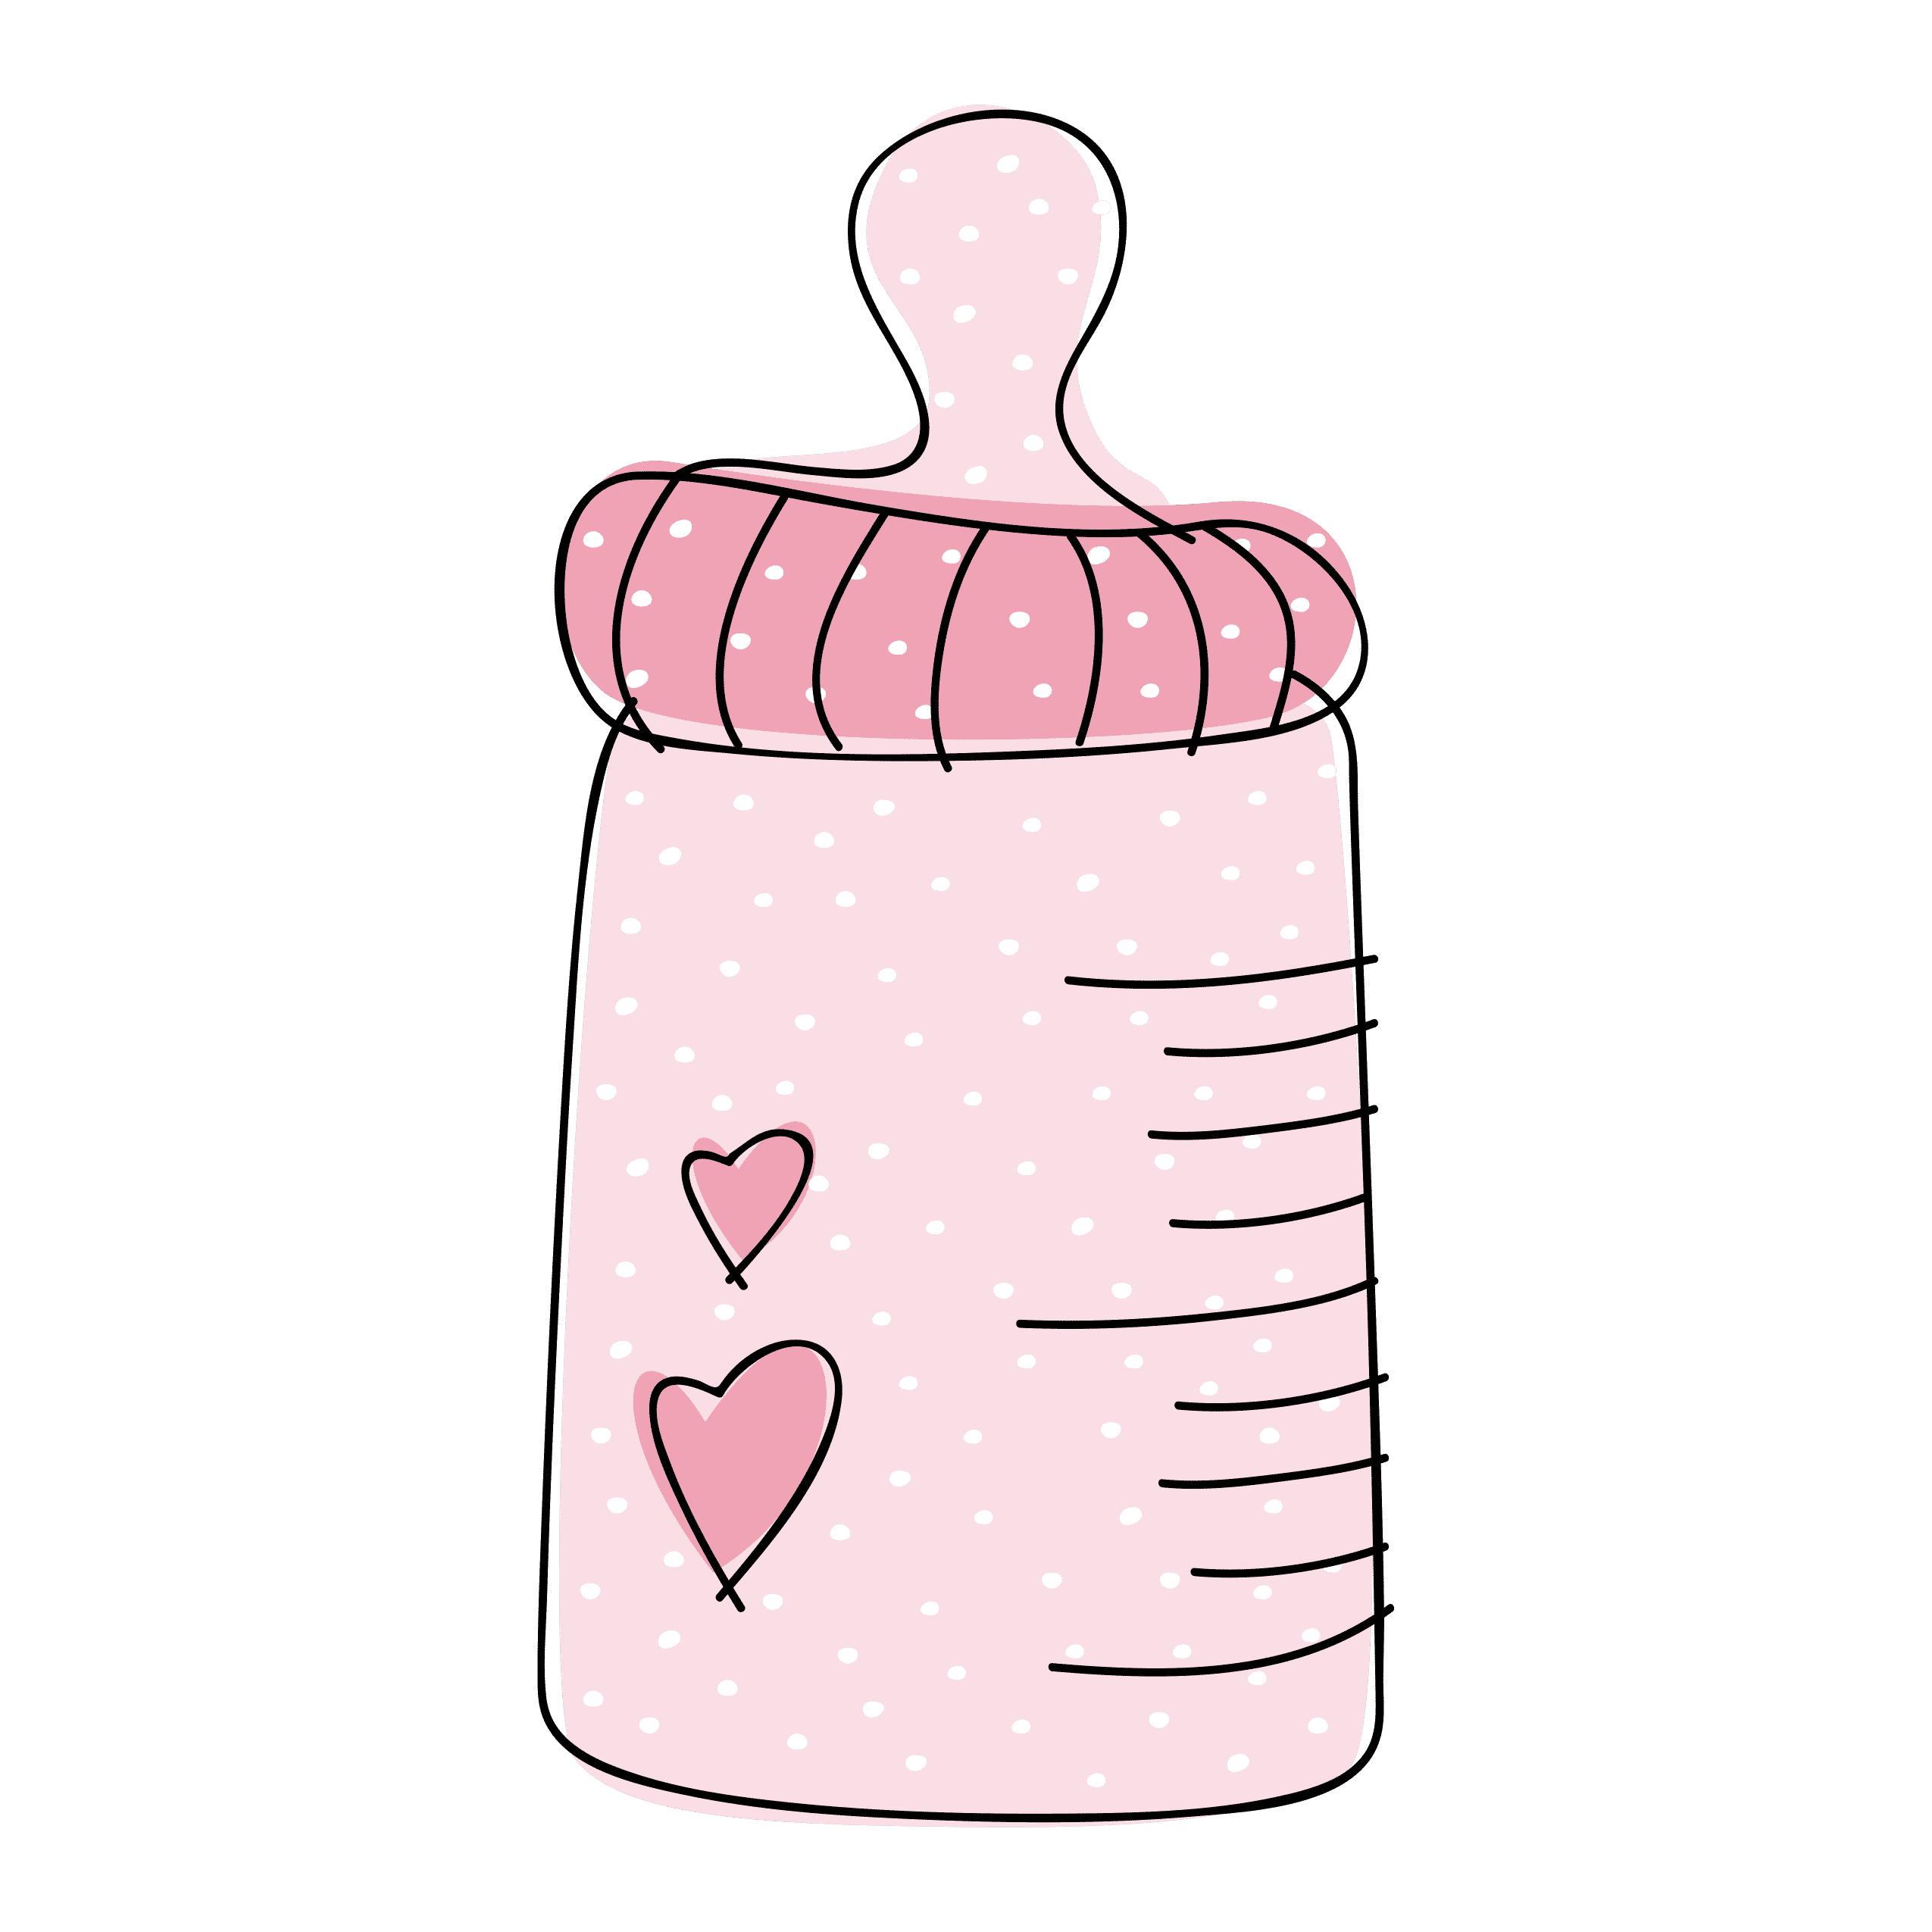 Download Free Downloadable Baby Bottle Clipart - Tulamama